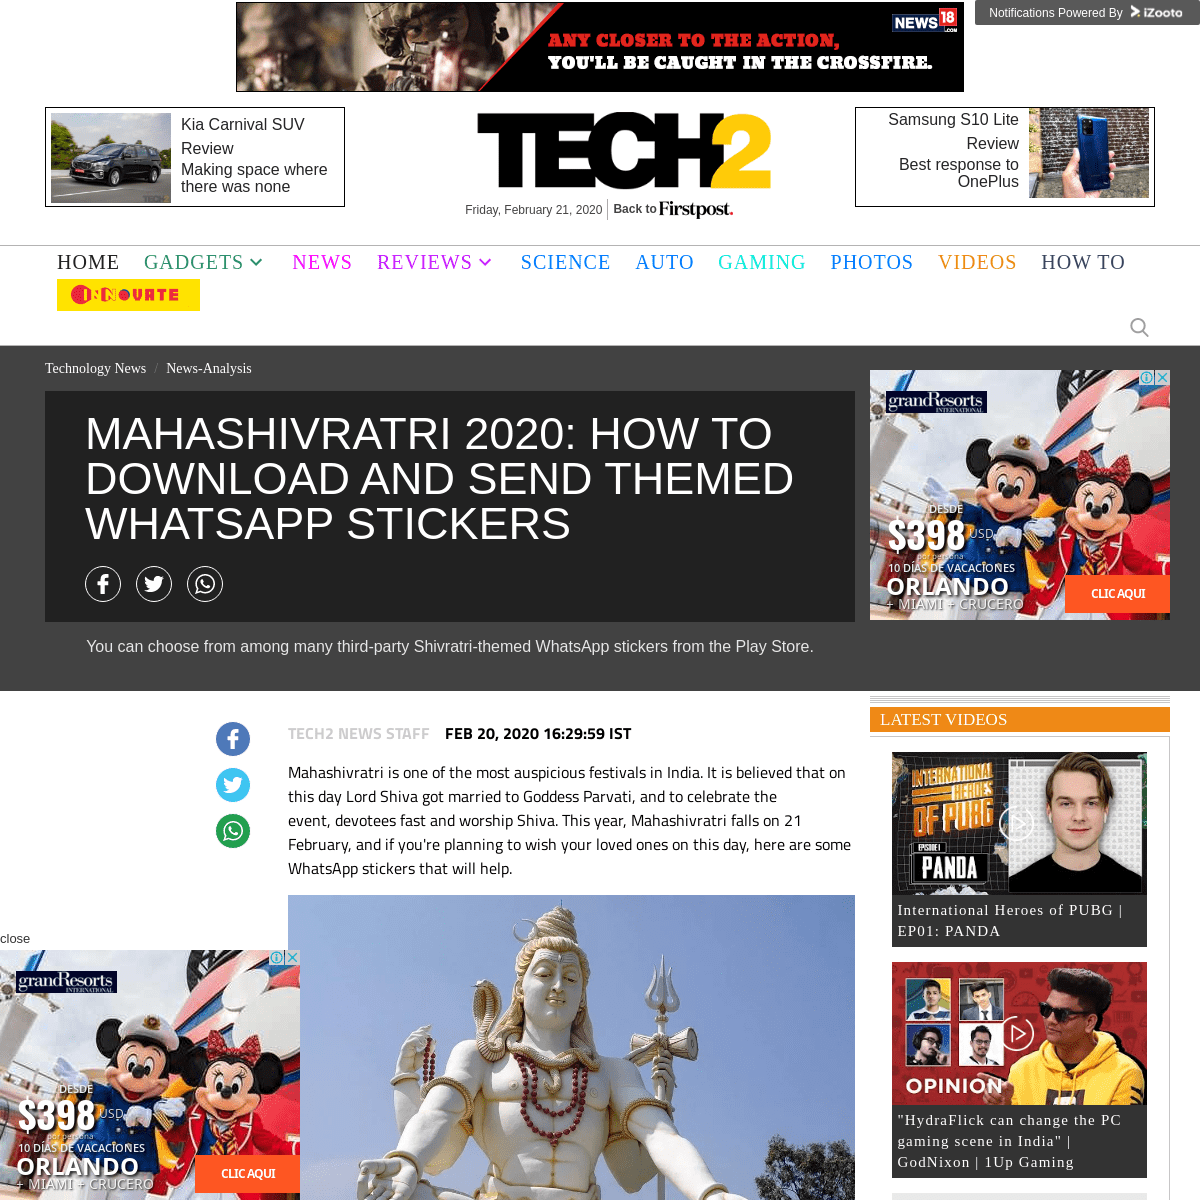 A complete backup of www.firstpost.com/tech/news-analysis/mahashivratri-2020-how-to-download-and-send-themed-whatsapp-stickers-8